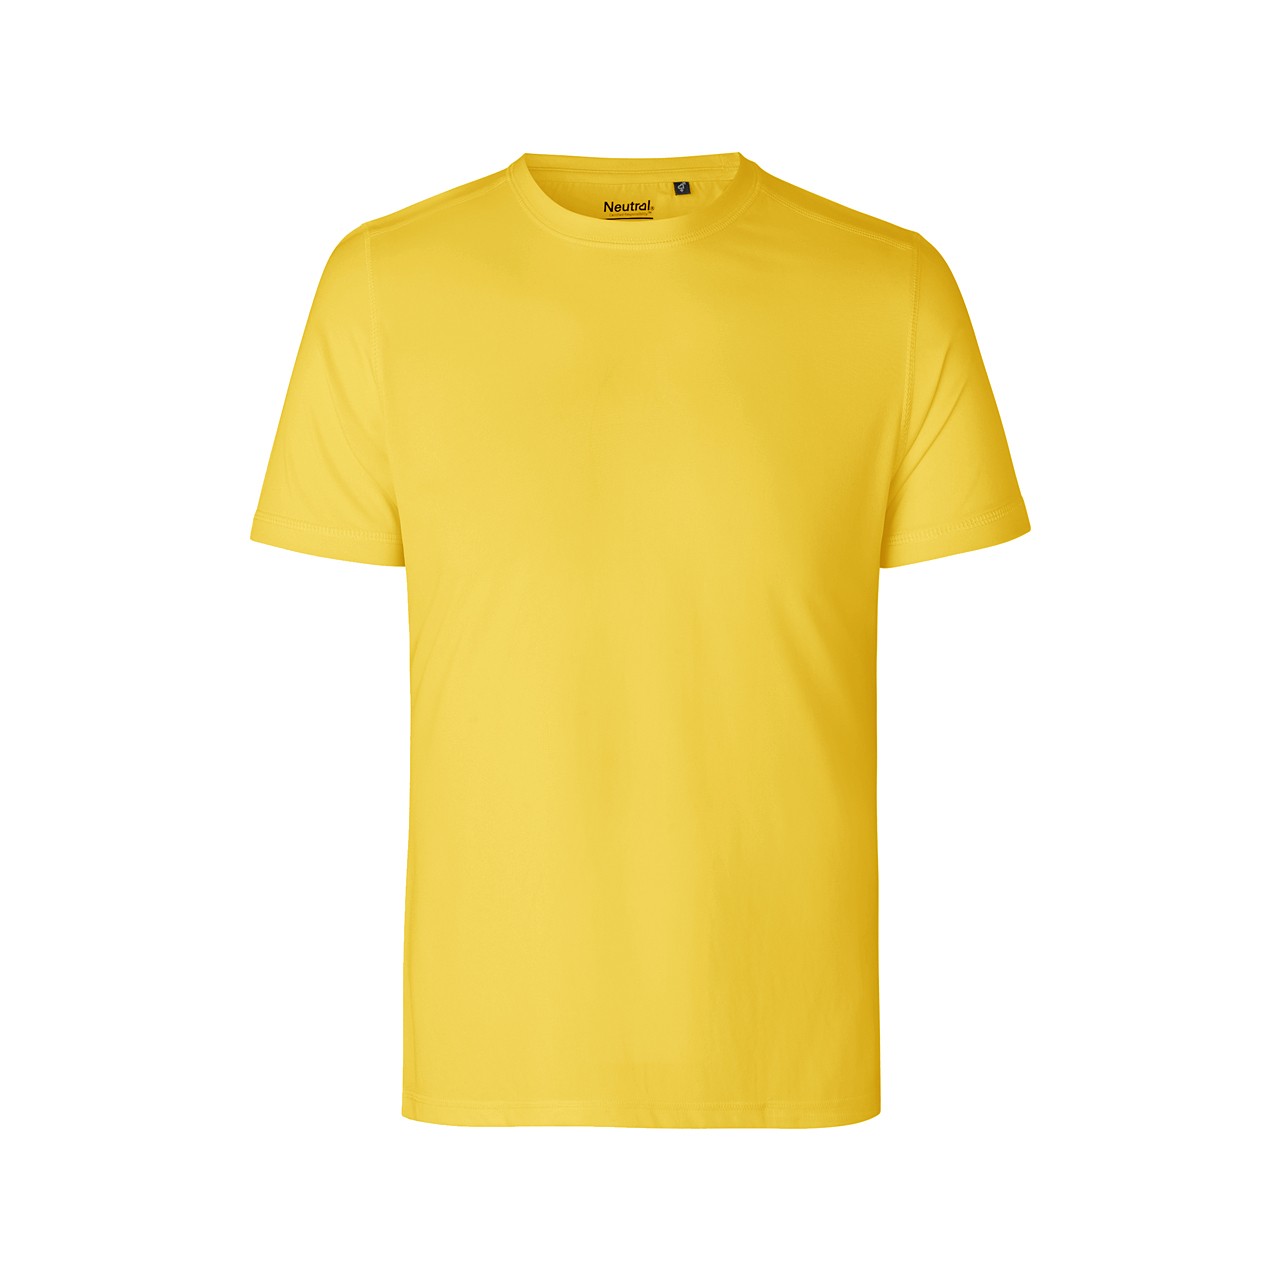 Fairtrade Recycled Performance T-Shirt 155 g/m² Neutral® Yellow XL